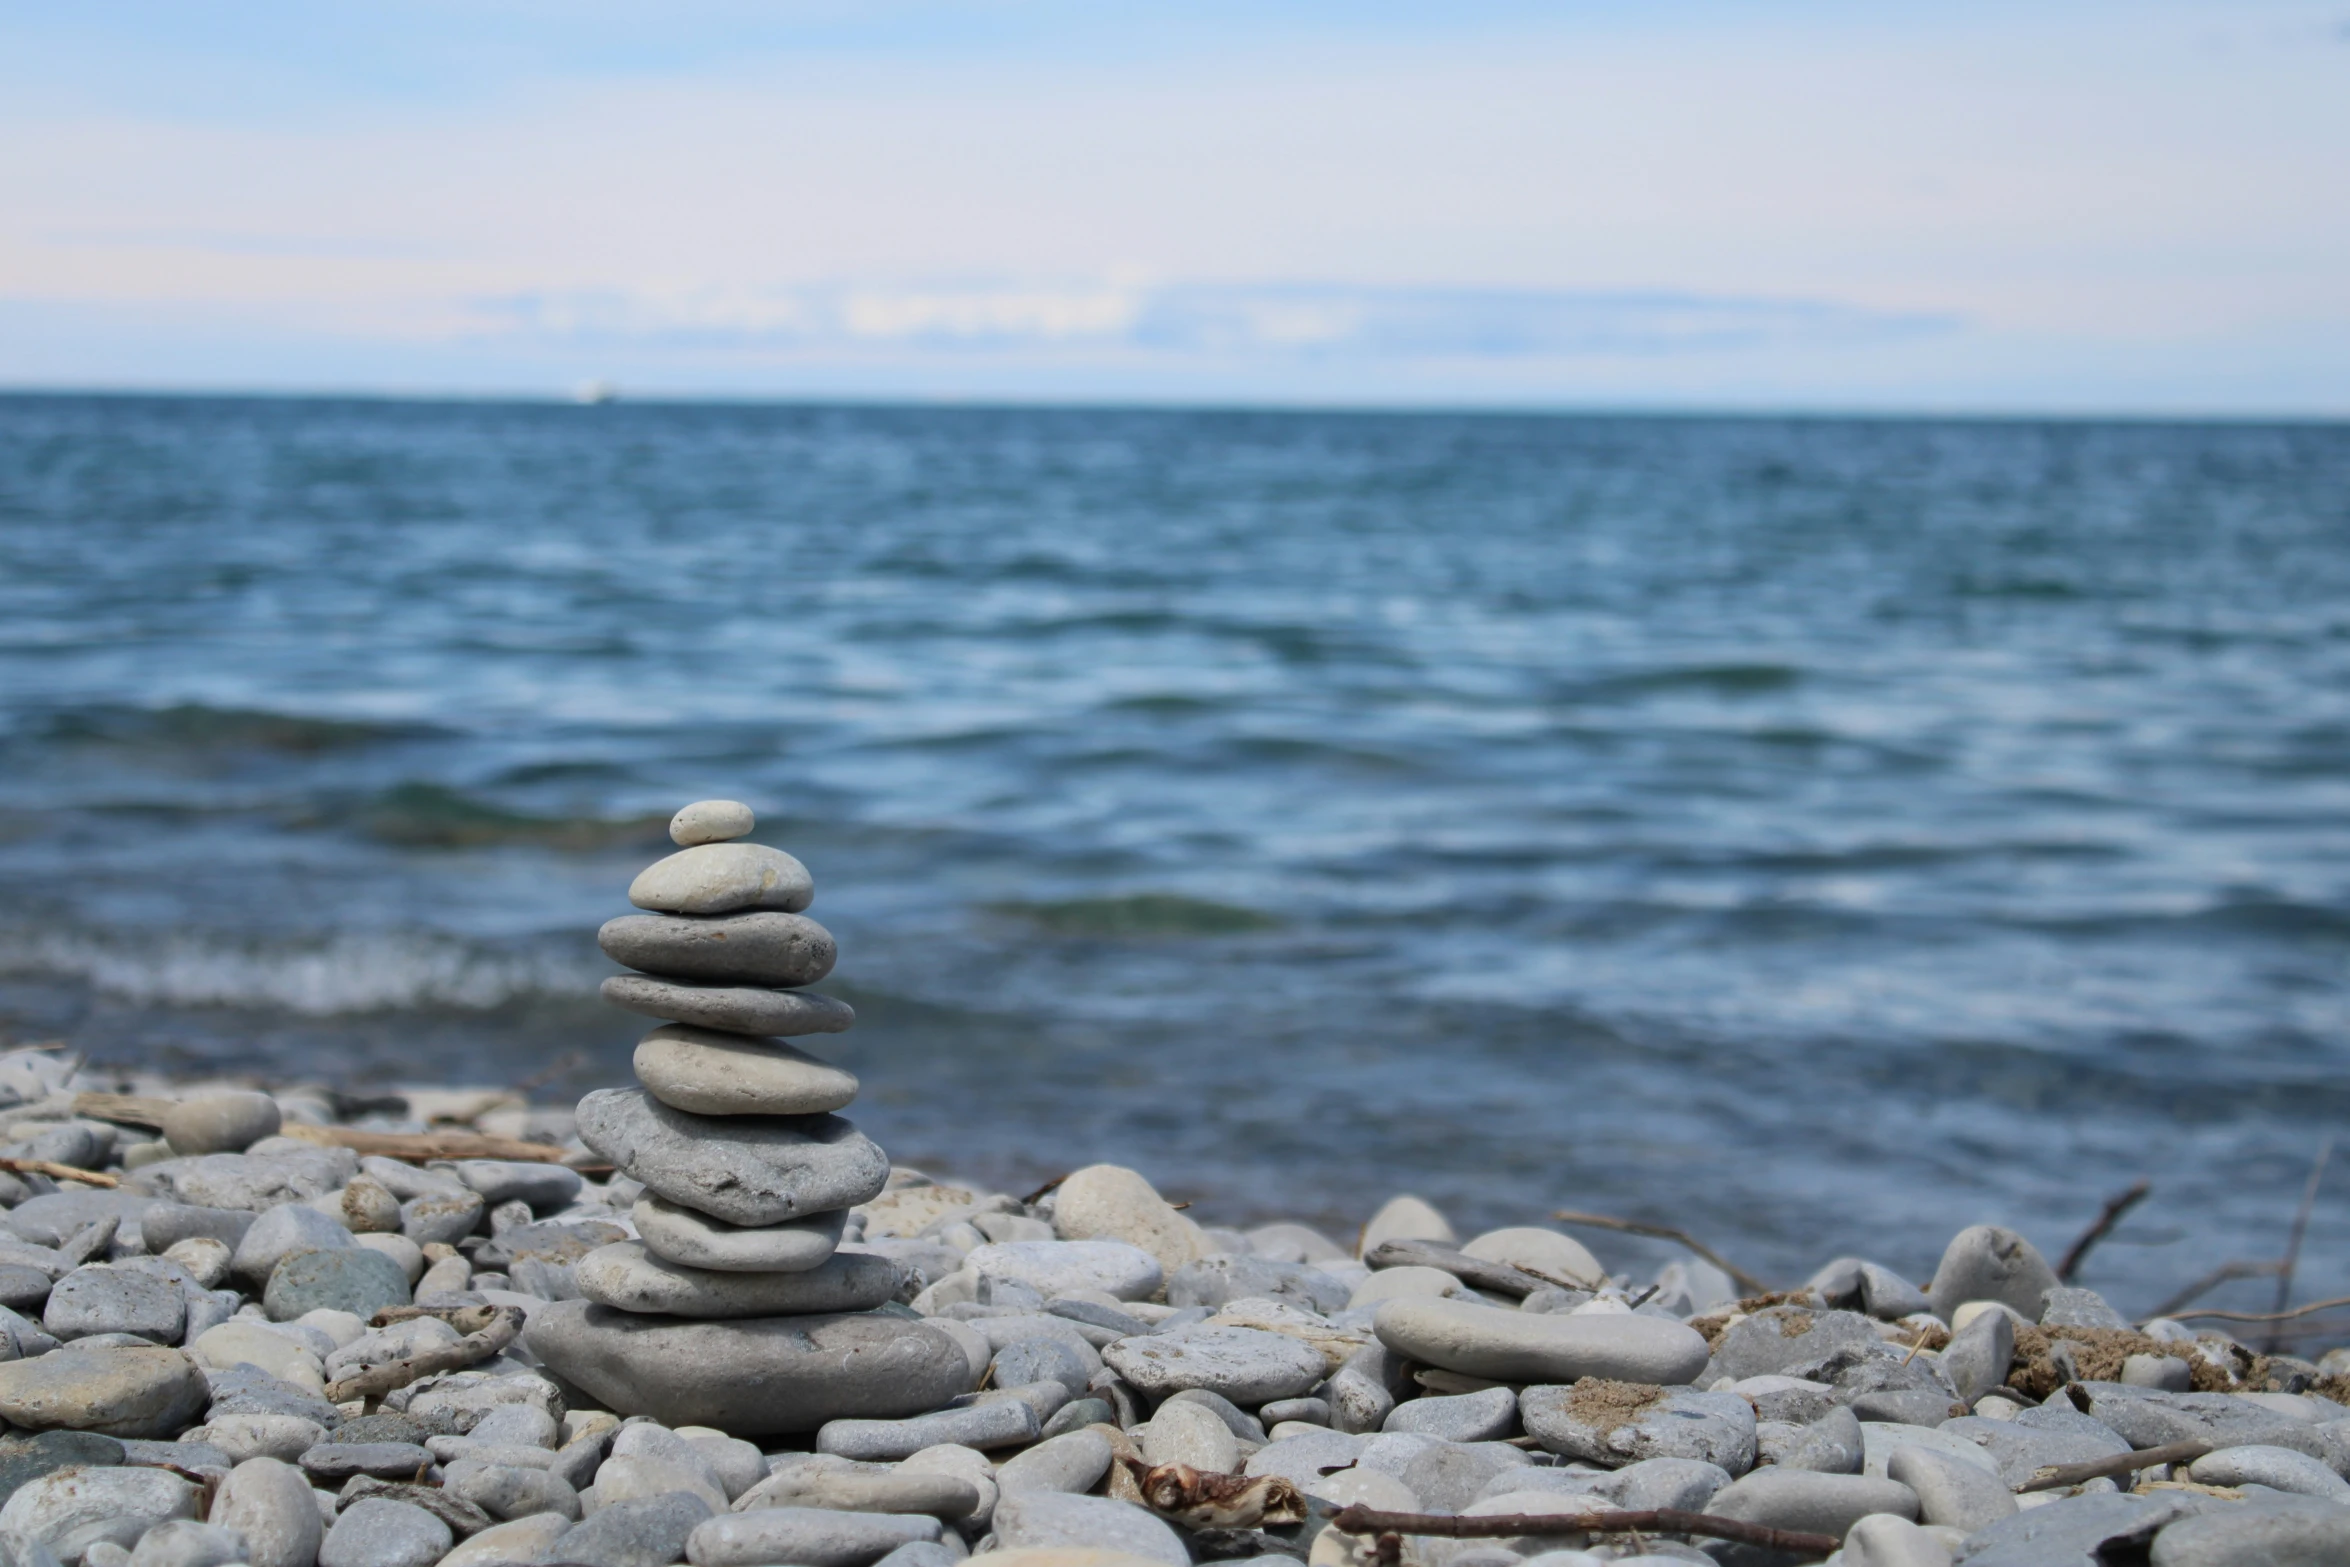 rocks and stones stacked up on the shore near water